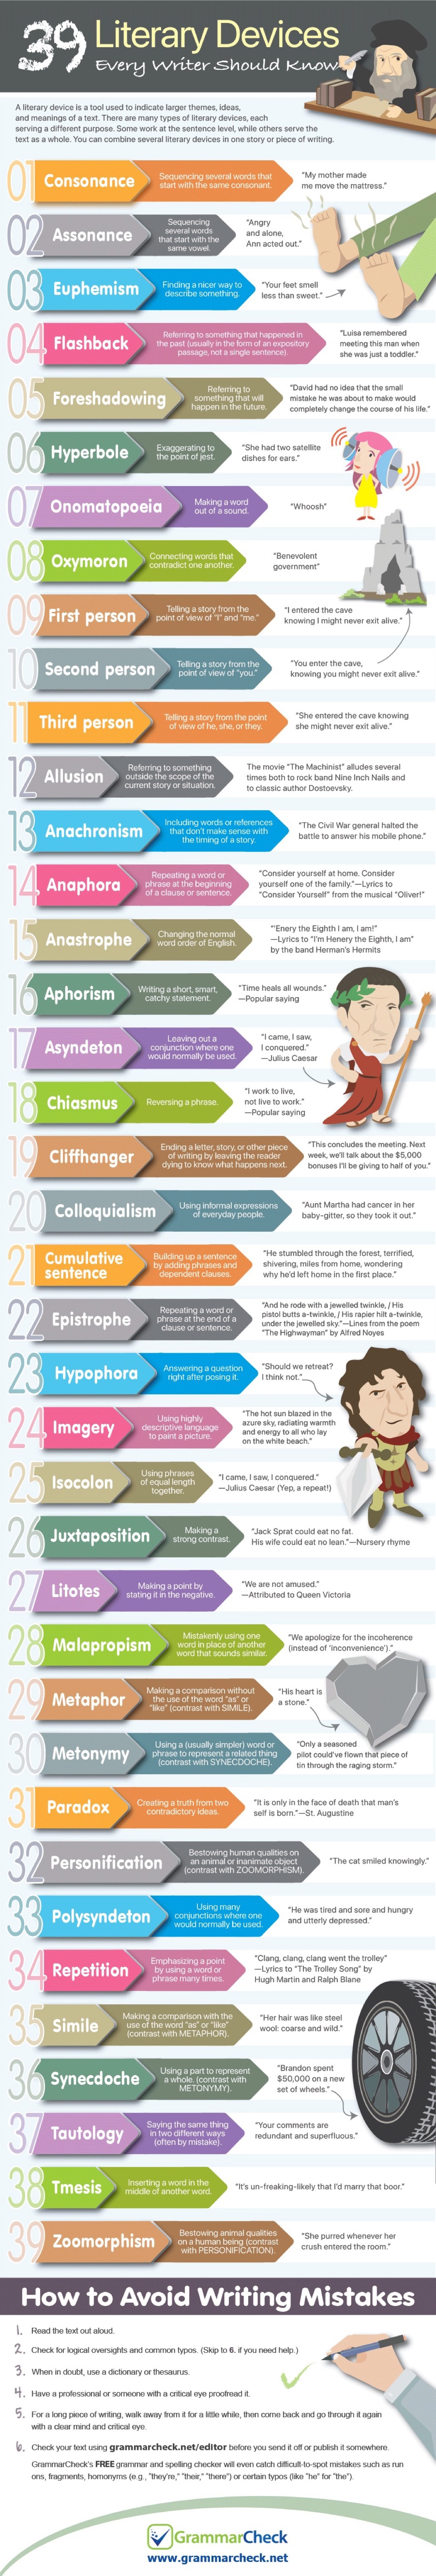 Literary devices - ultimate infographic guide